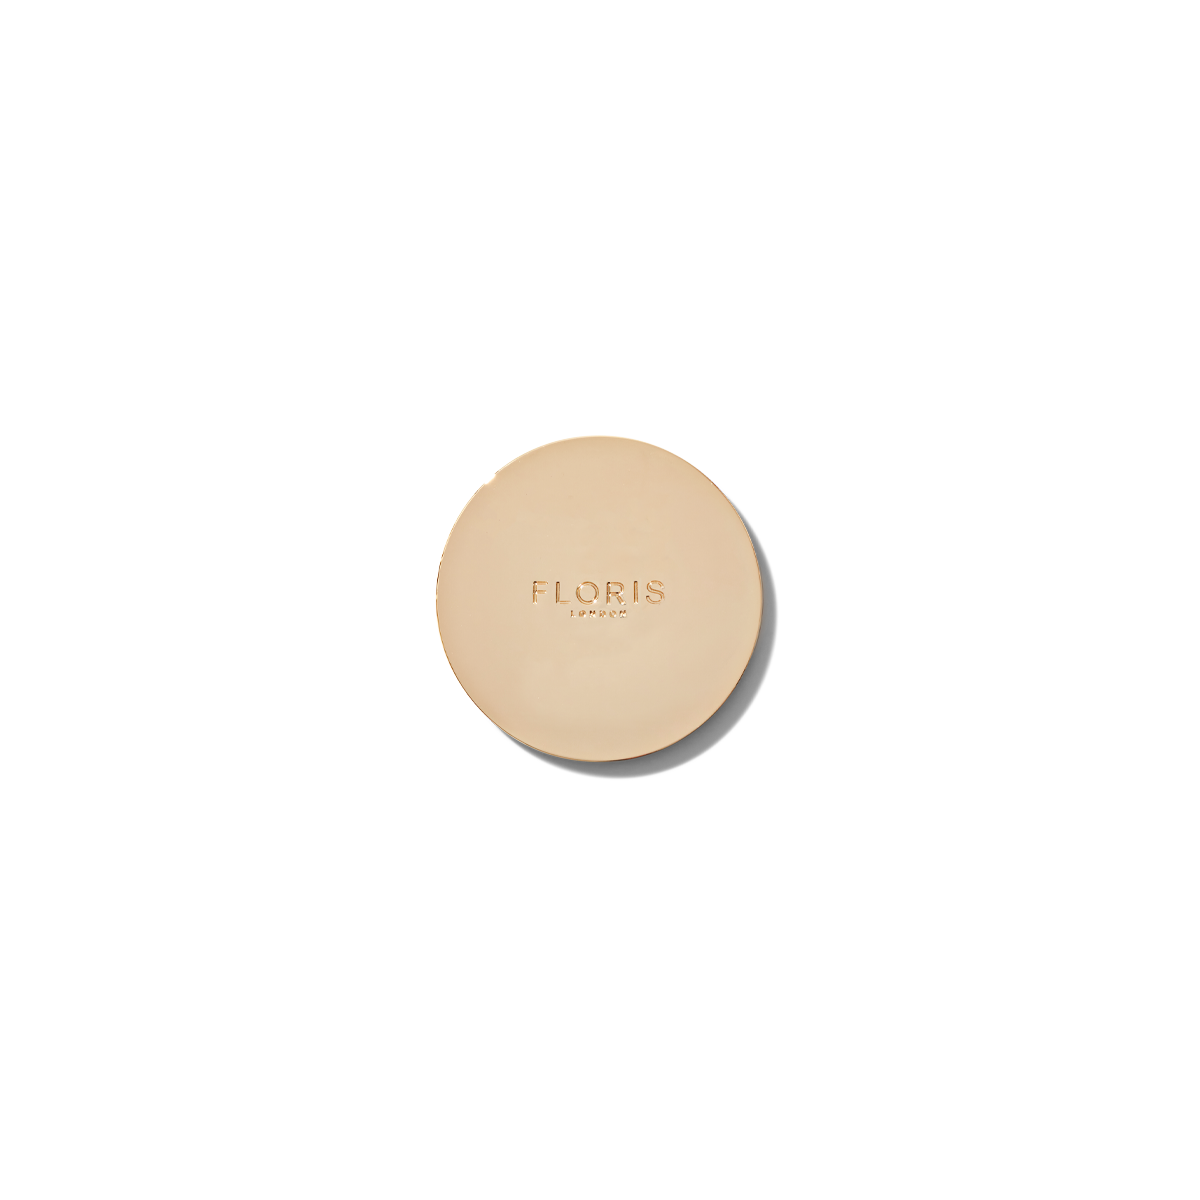 Floris london gold candle lid embossed with Floris london.